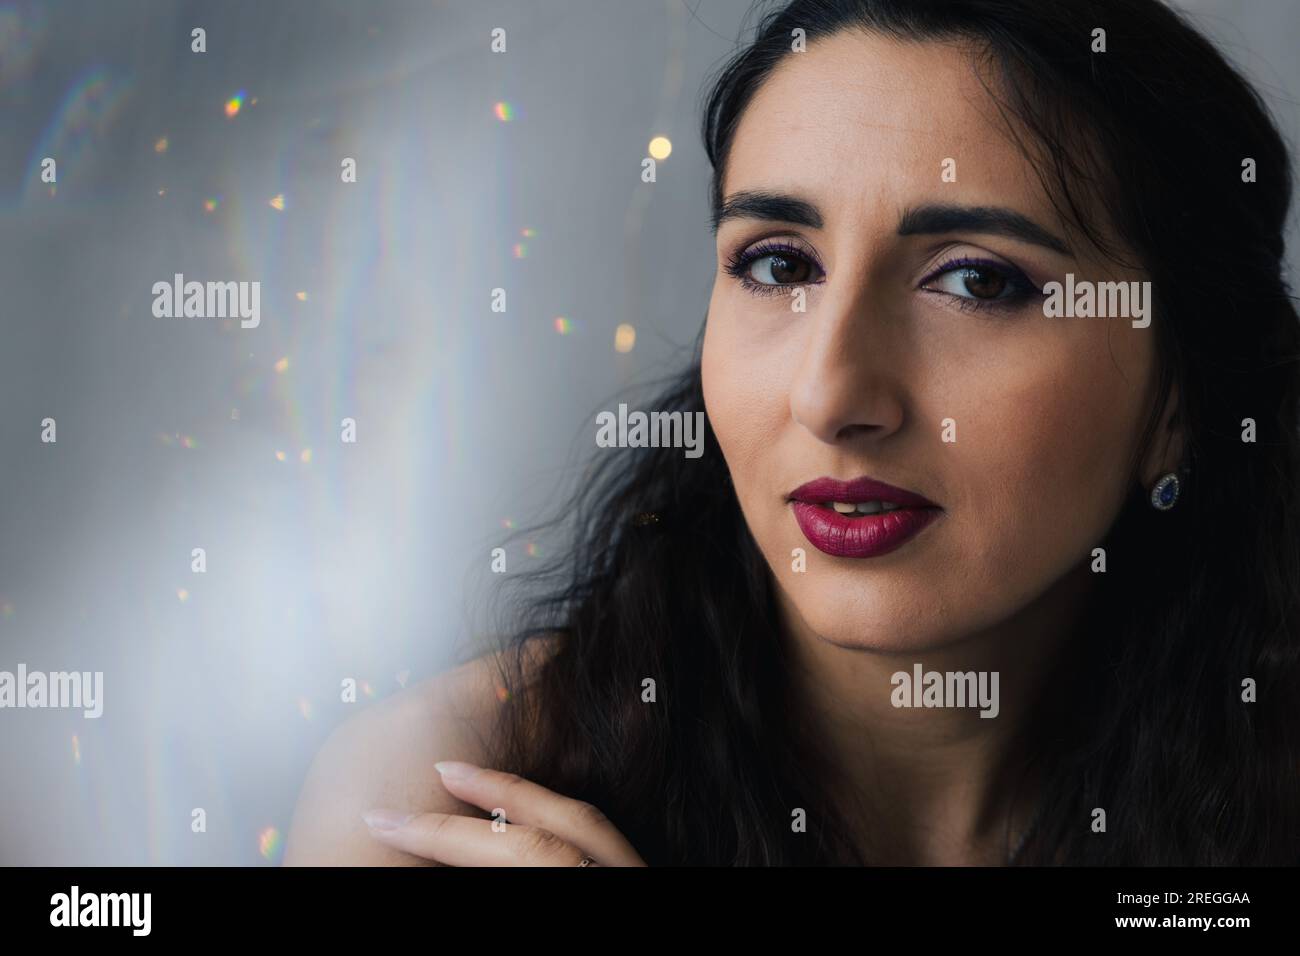 Close-up of a girl on a gray background with twinkle lights Stock Photo